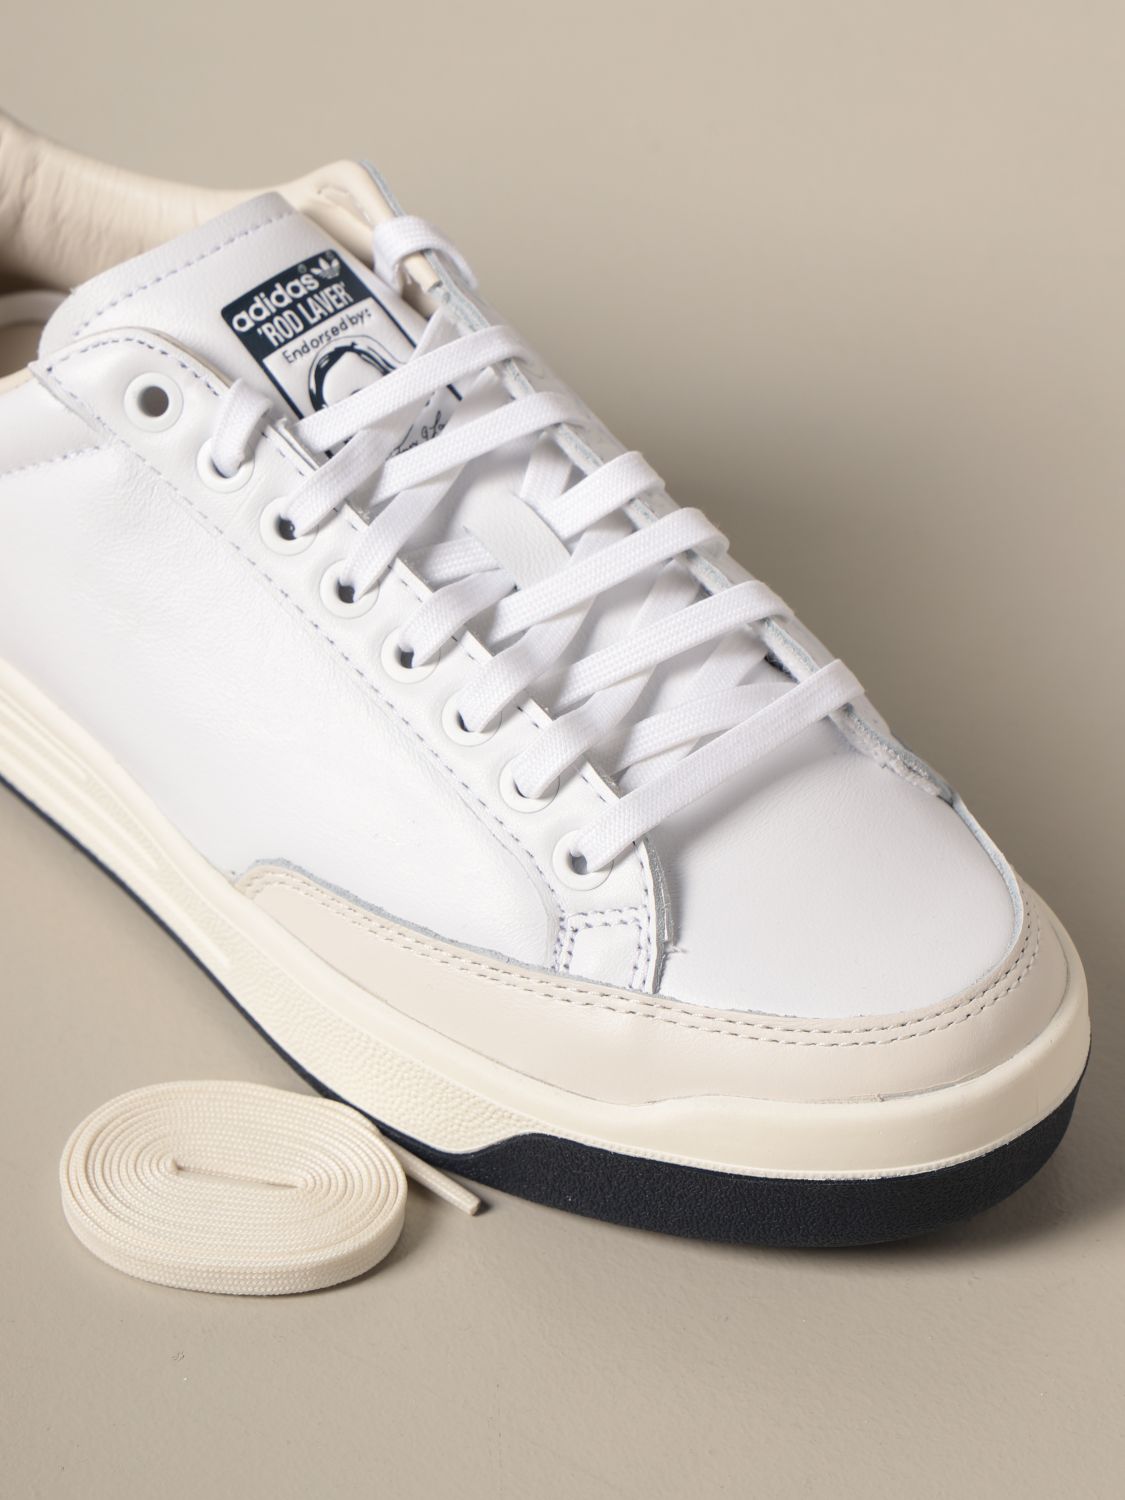 adidas shoes white leather